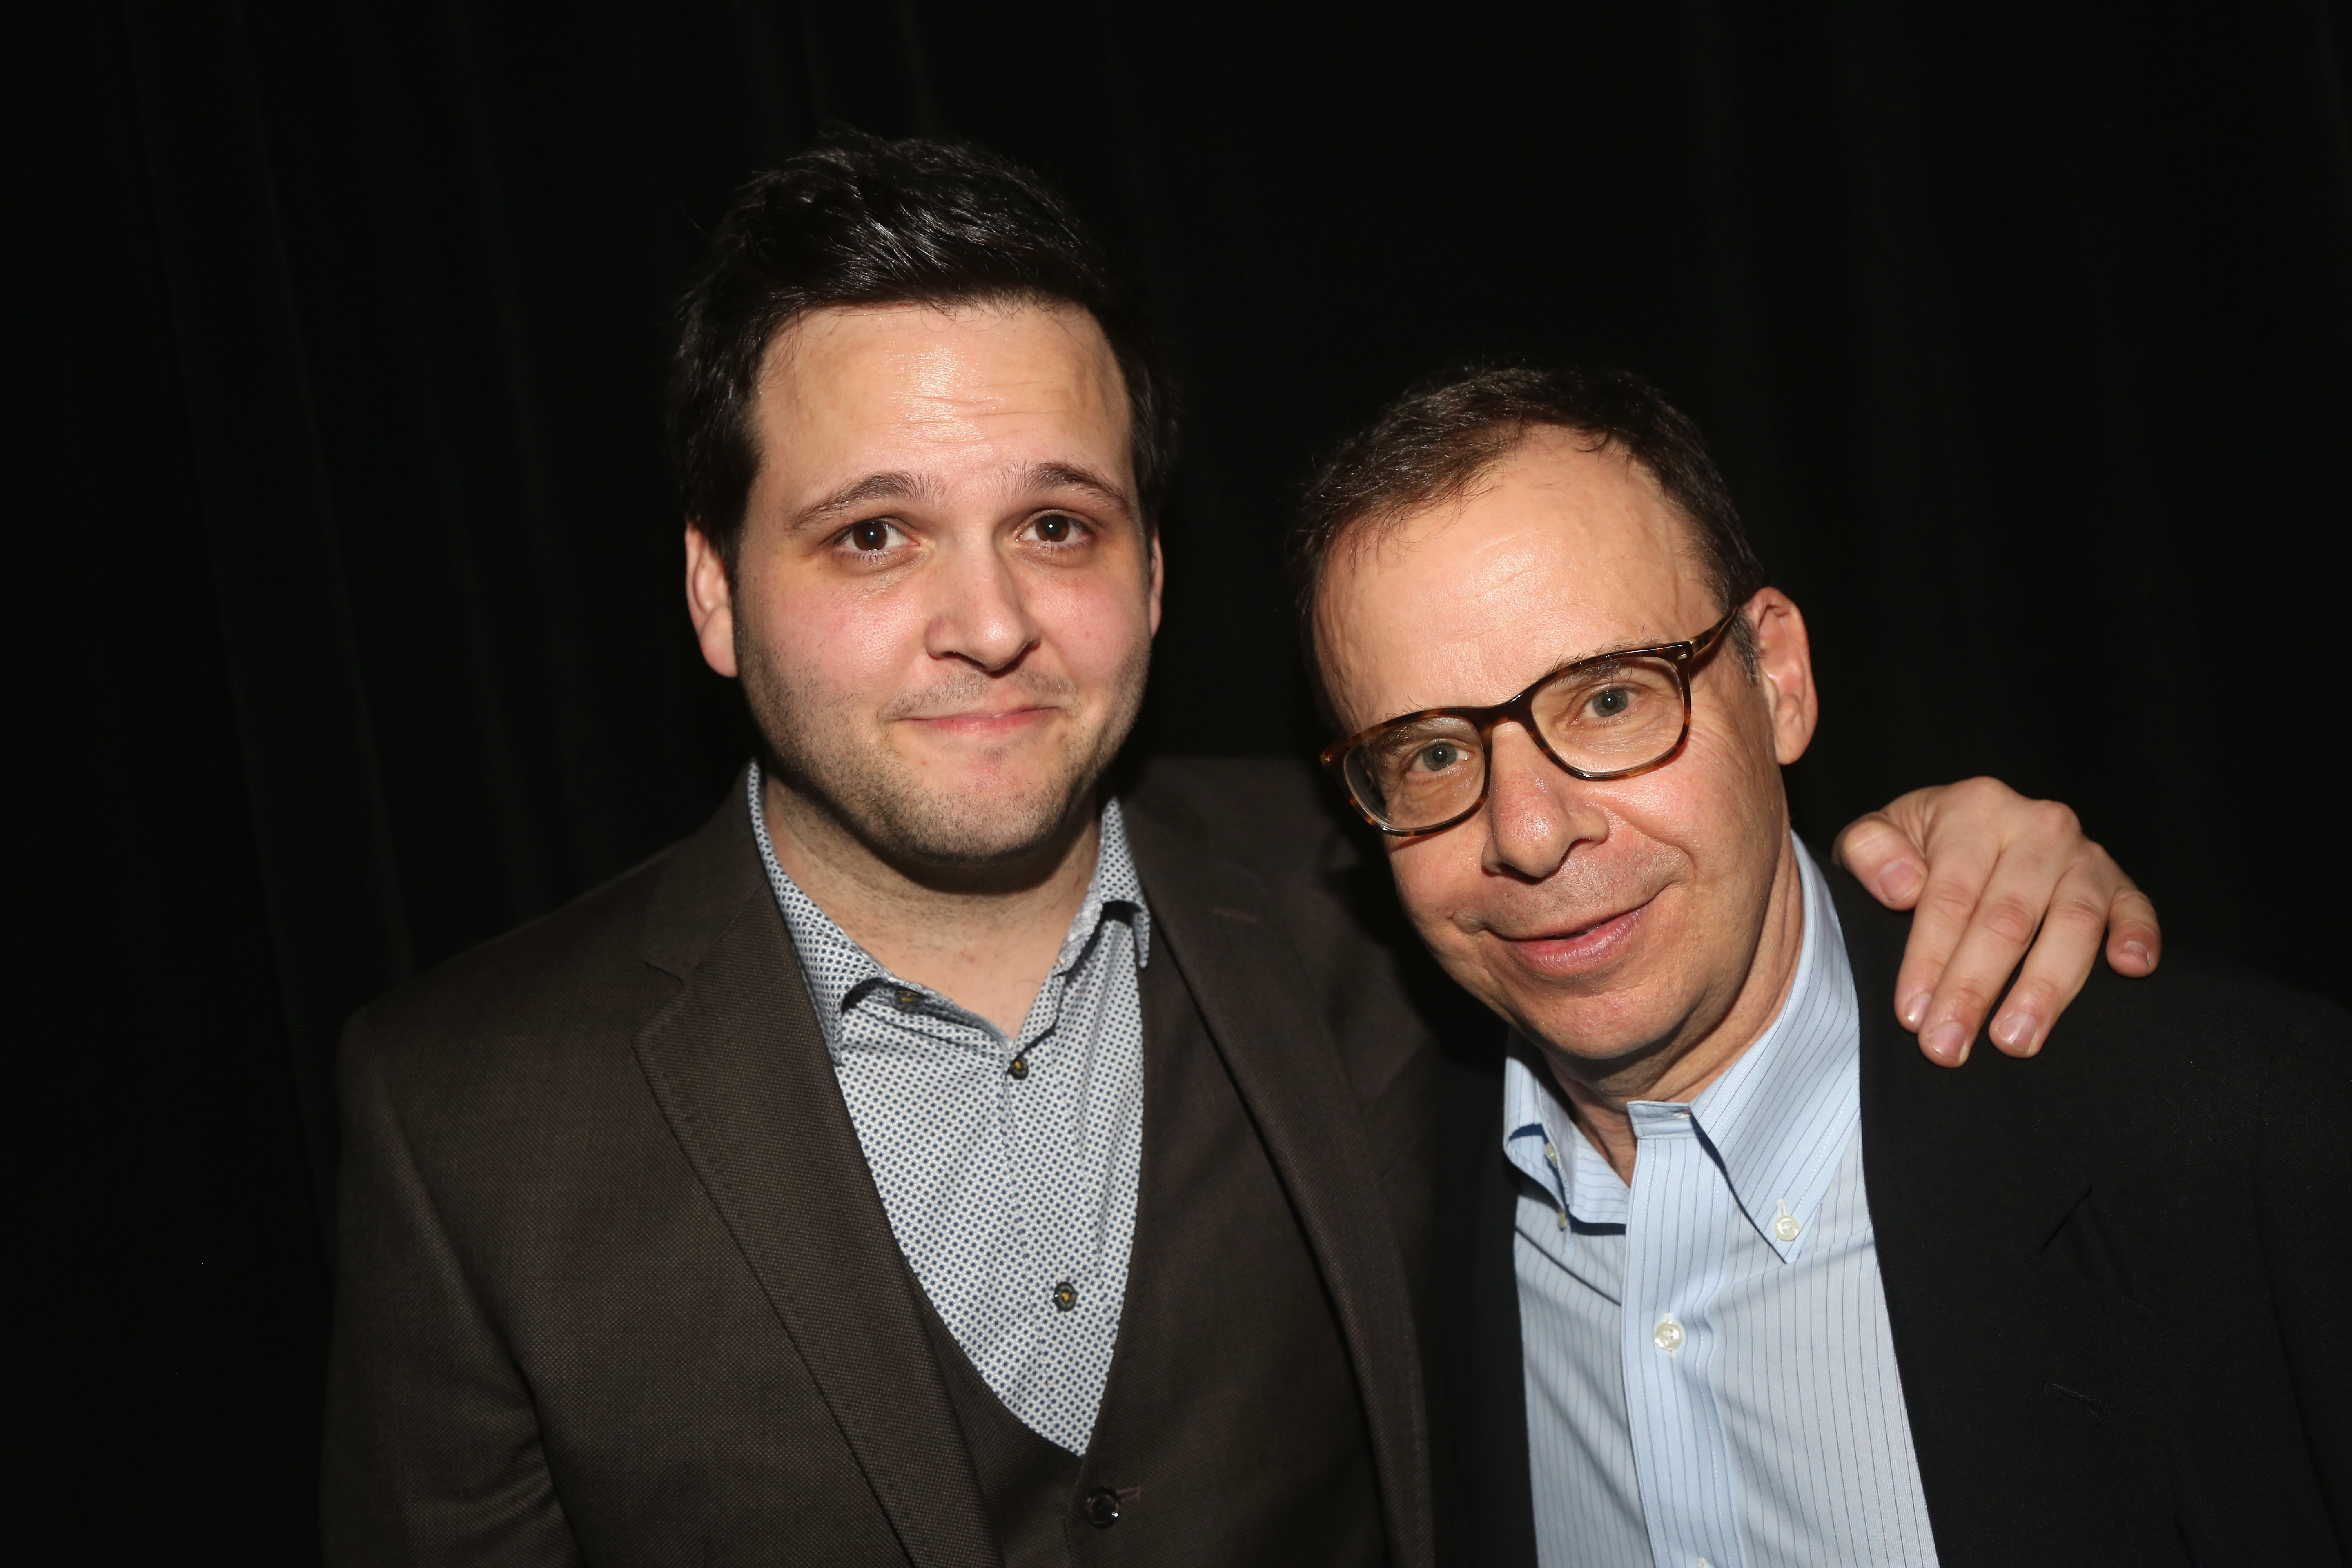 Derek DelGaudio and Rick Moranis pose at the opening night after party for "In & Of Itself" at The Ace Hotel on April 12, 2017 in New York City. | Source: Getty Images